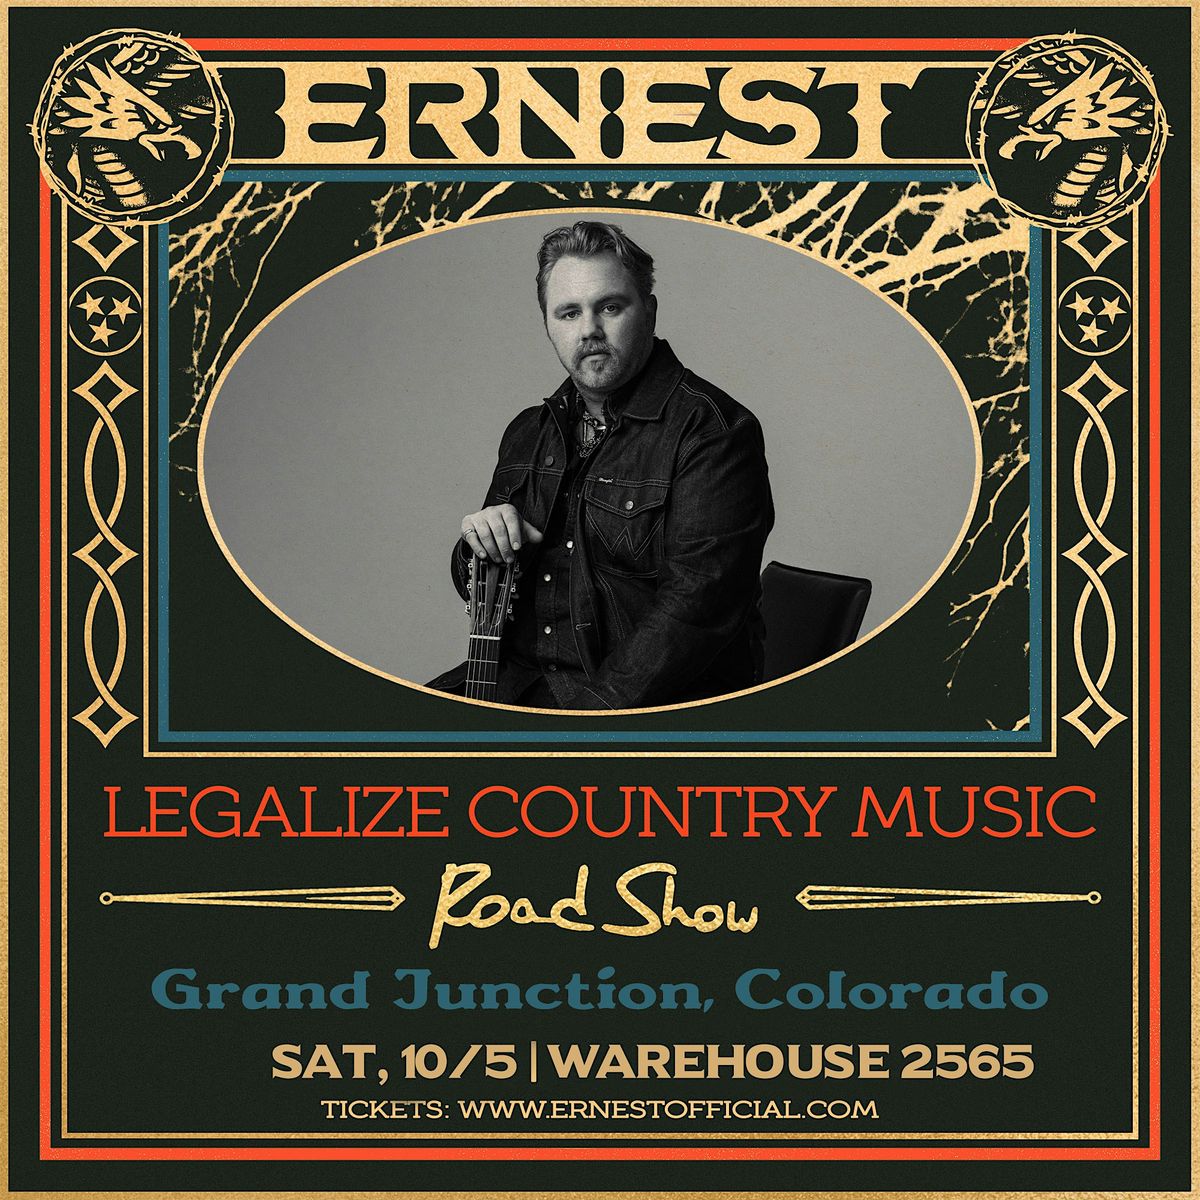 Ernest Legalize Country Music Road Show!